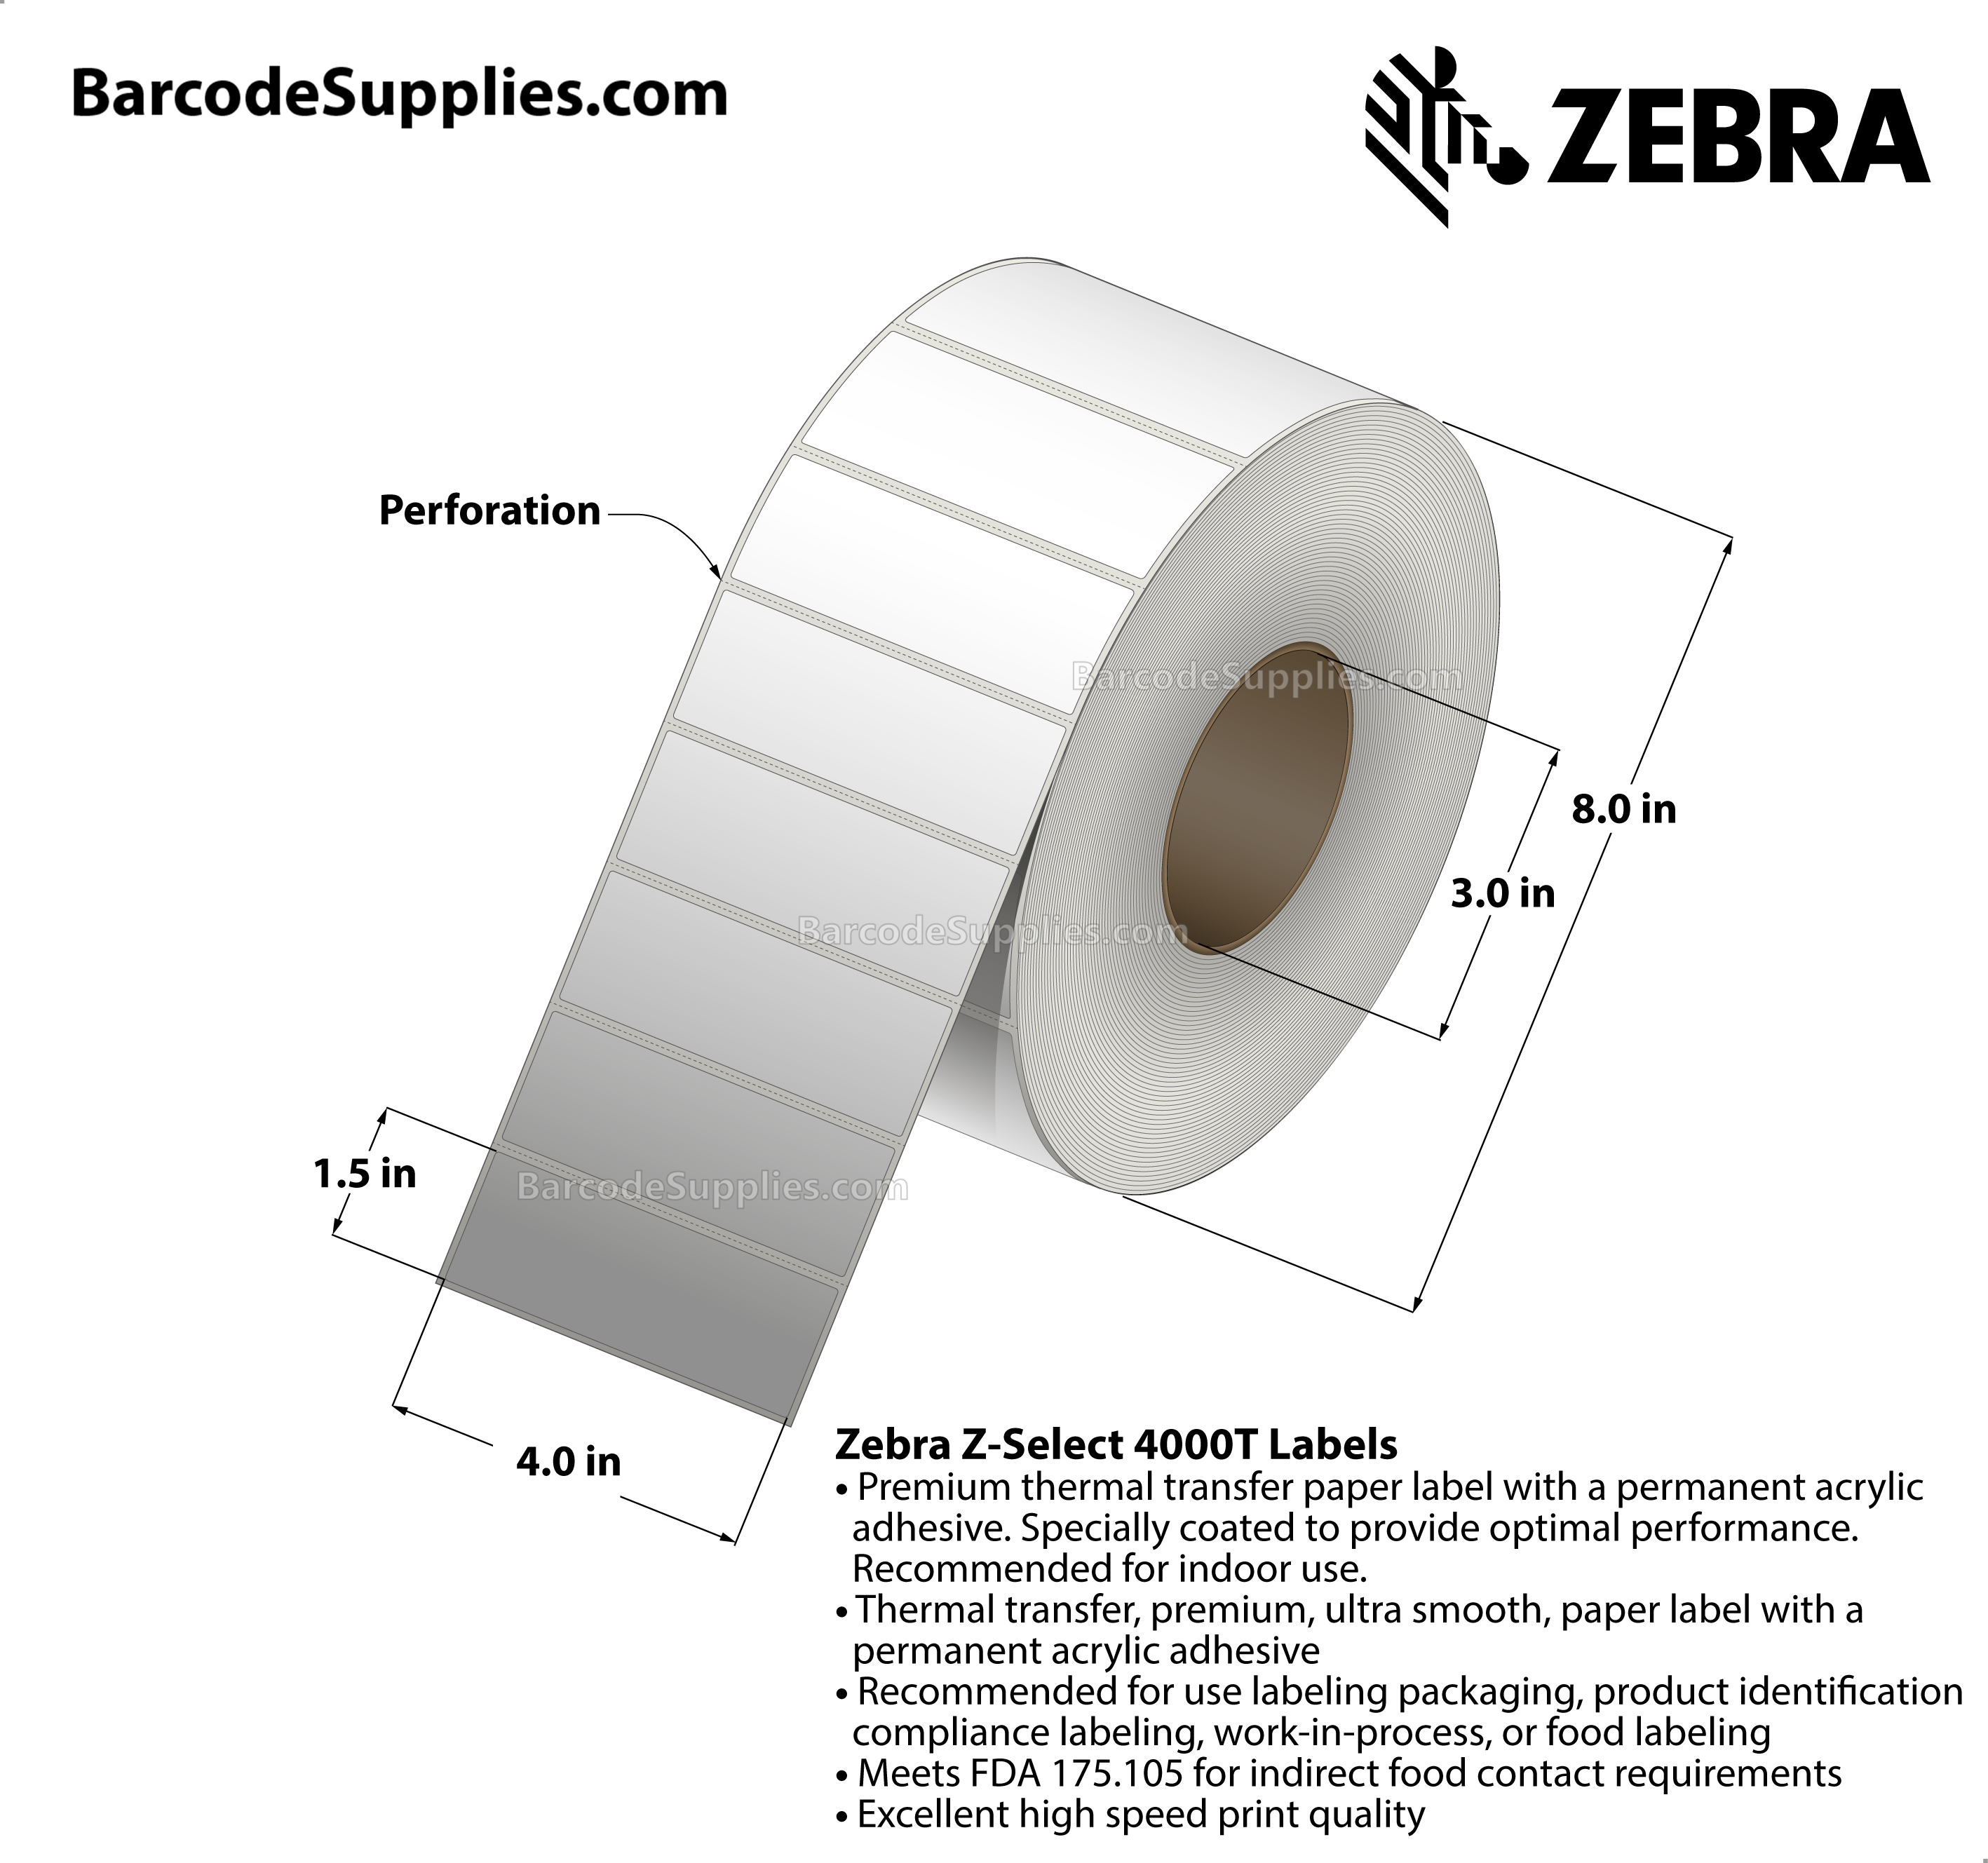 4 x 1.5 Thermal Transfer White Z-Select 4000T Labels With Permanent Adhesive - Perforated - 4225 Labels Per Roll - Carton Of 4 Rolls - 16900 Labels Total - MPN: 800640-155